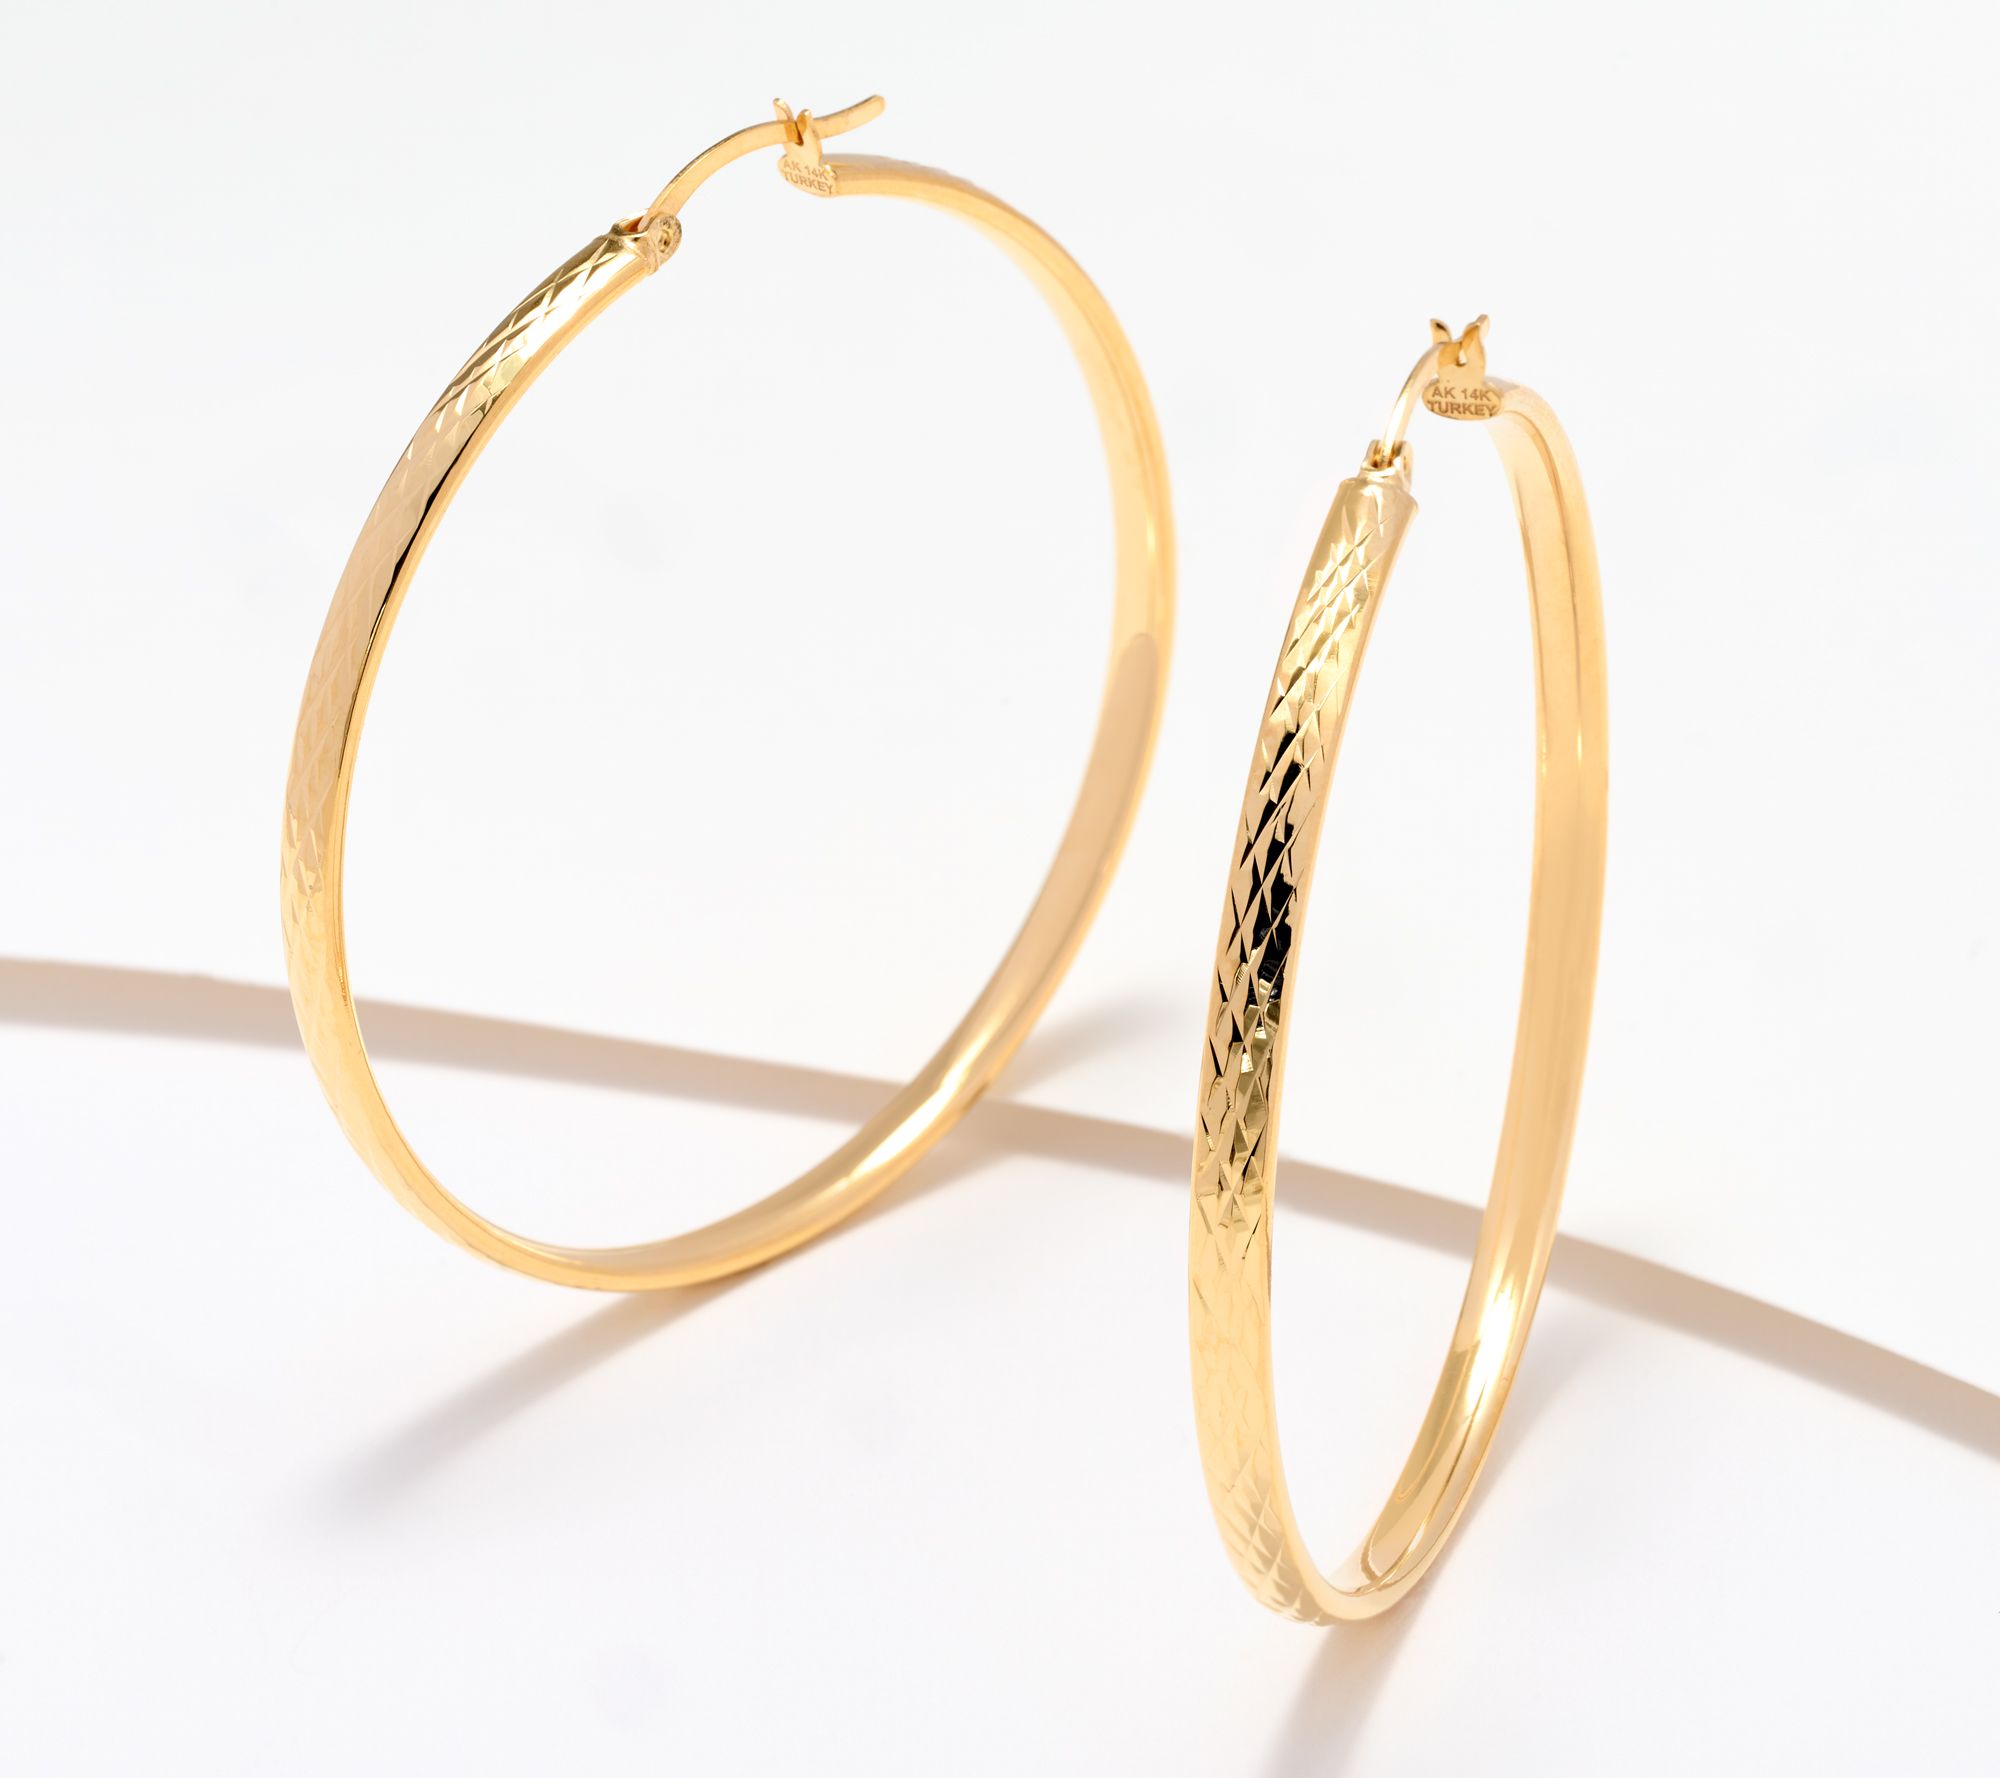 1 inch LV Hoops  Fisher's beauty line